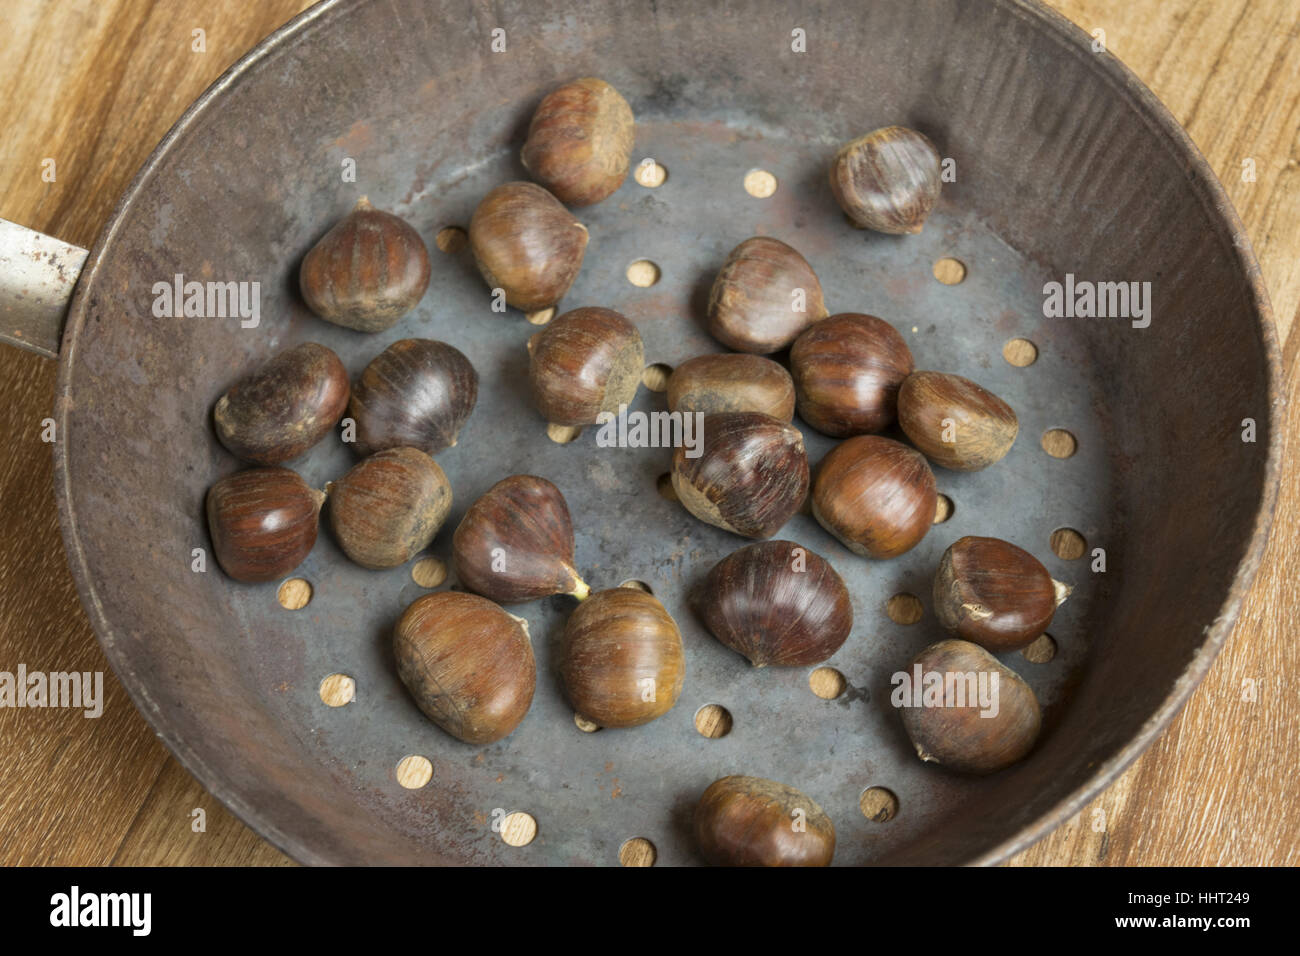 Premium Photo  Roasted chestnuts in a chestnut pan skillet with holes on a  aged brown wooden table